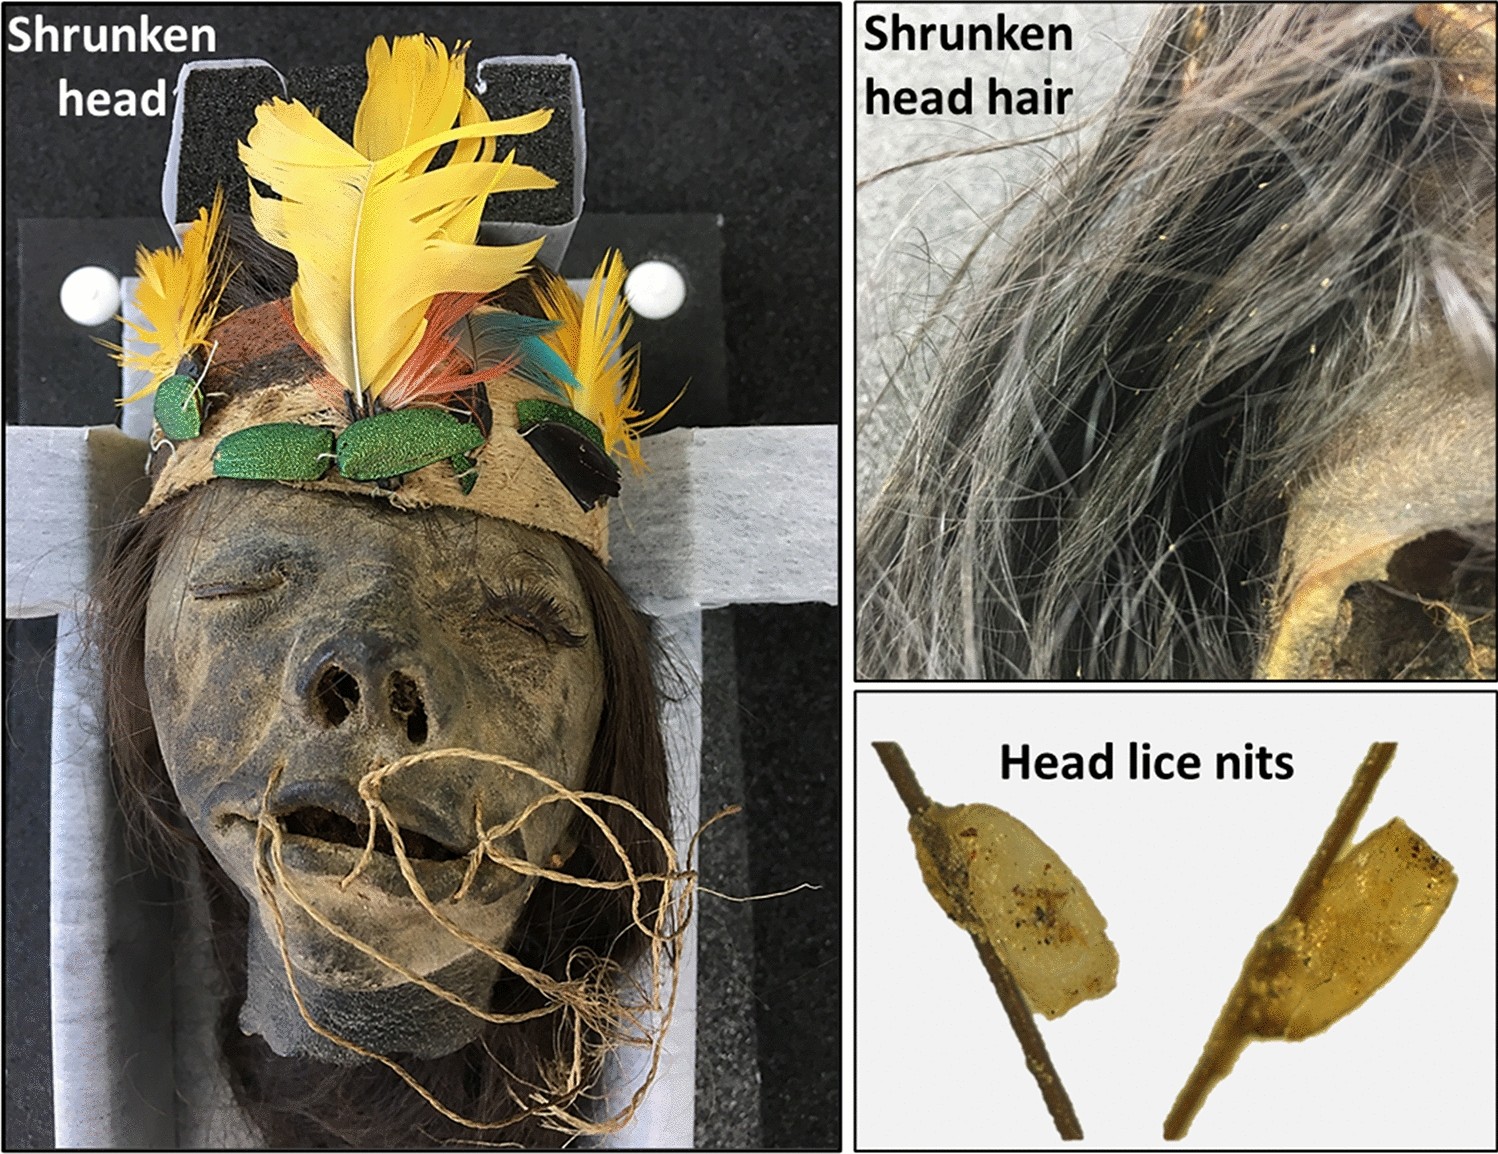 Putative native South Amerindian origin of head lice clade F: evidence from  head lice nits infesting human shrunken heads | Scientific Reports